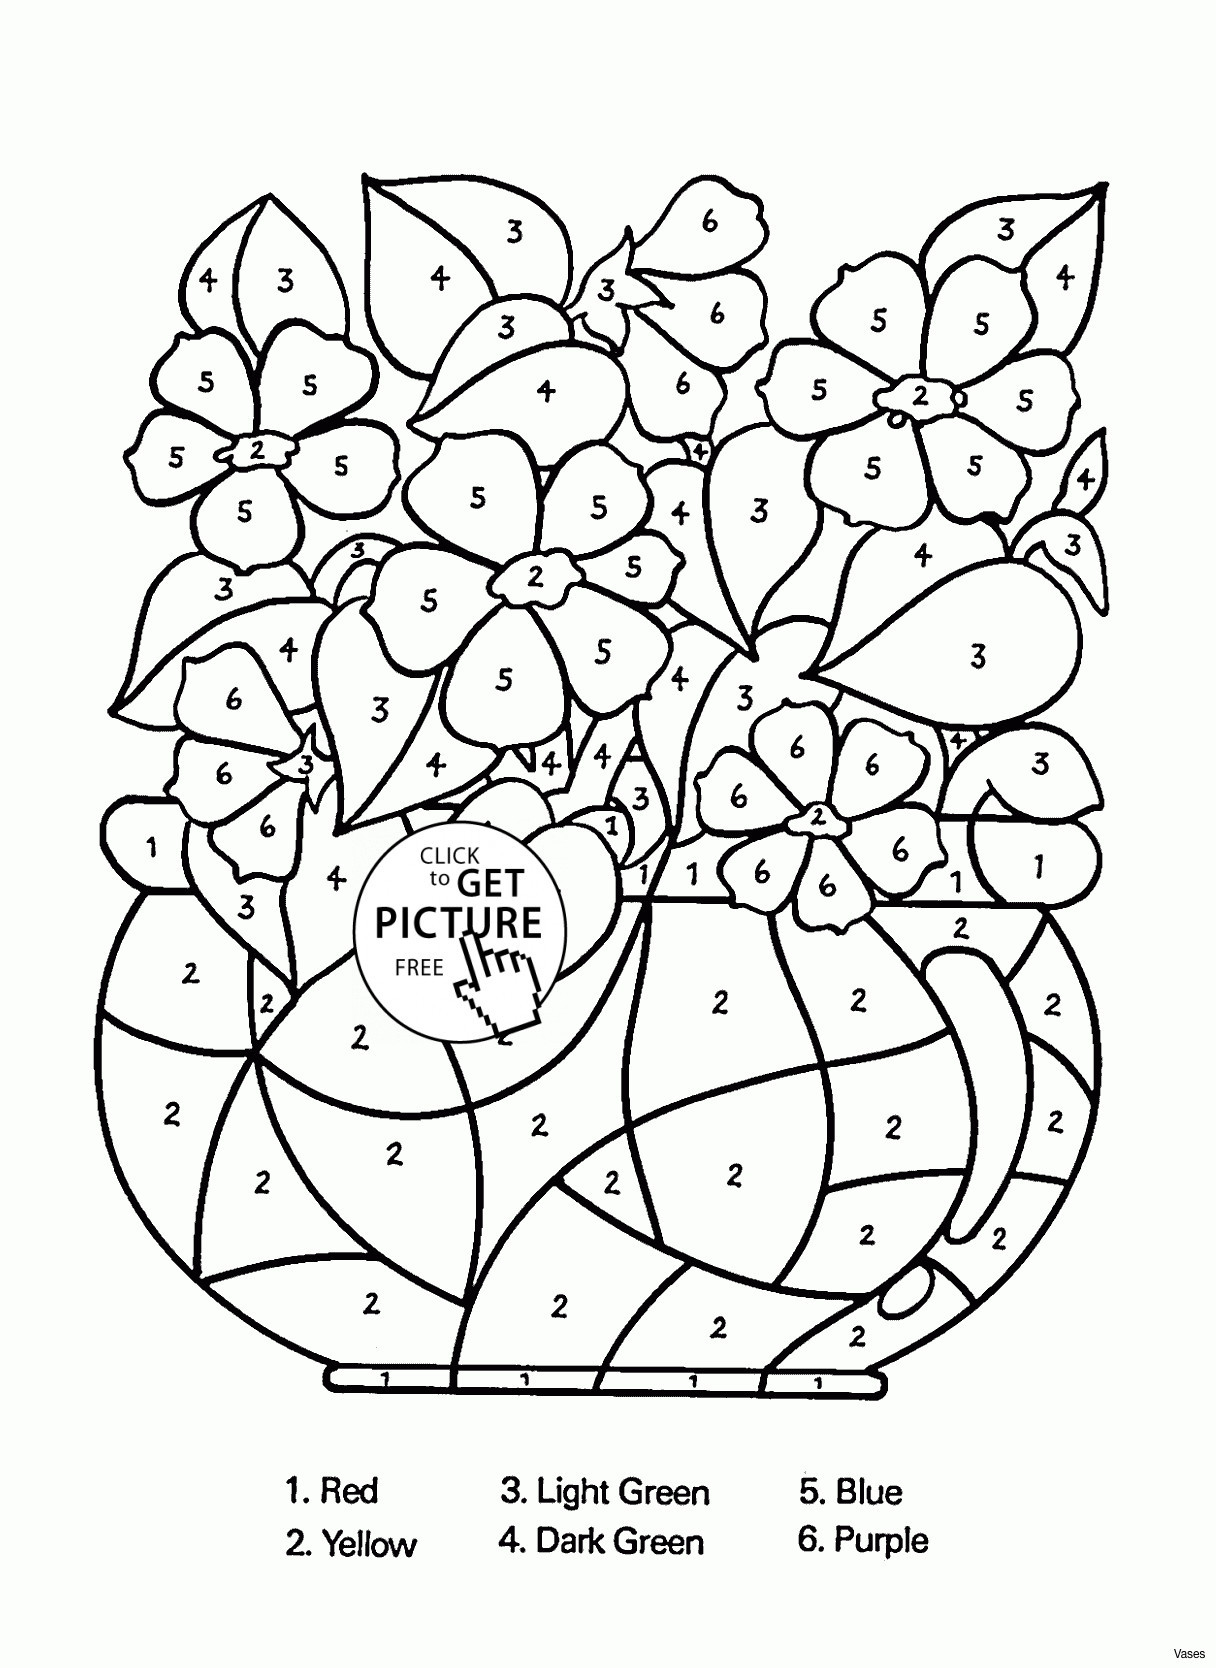 turquoise flower vase of dark green pillows new cool vases flower vase coloring page pages pertaining to dark green pillows new cool vases flower vase coloring page pages flowers in a top i